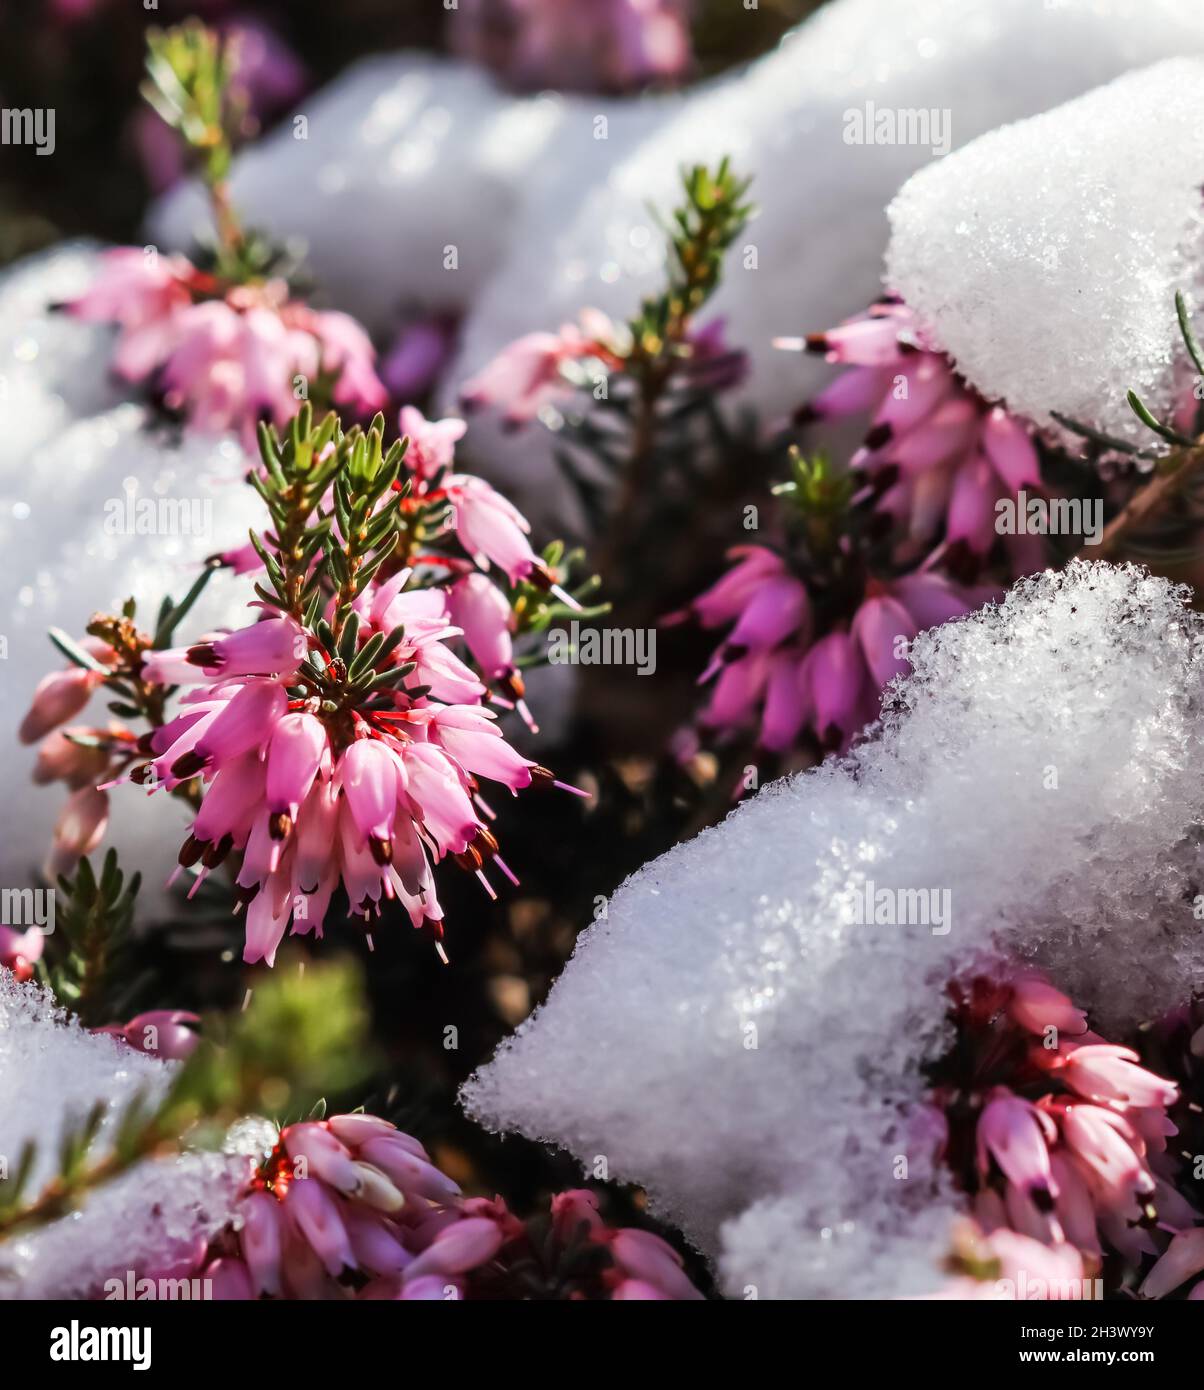 Blooming pink Erica carnea flowers (Winter Heath) and snow in the garden in early spring. Floral background Stock Photo